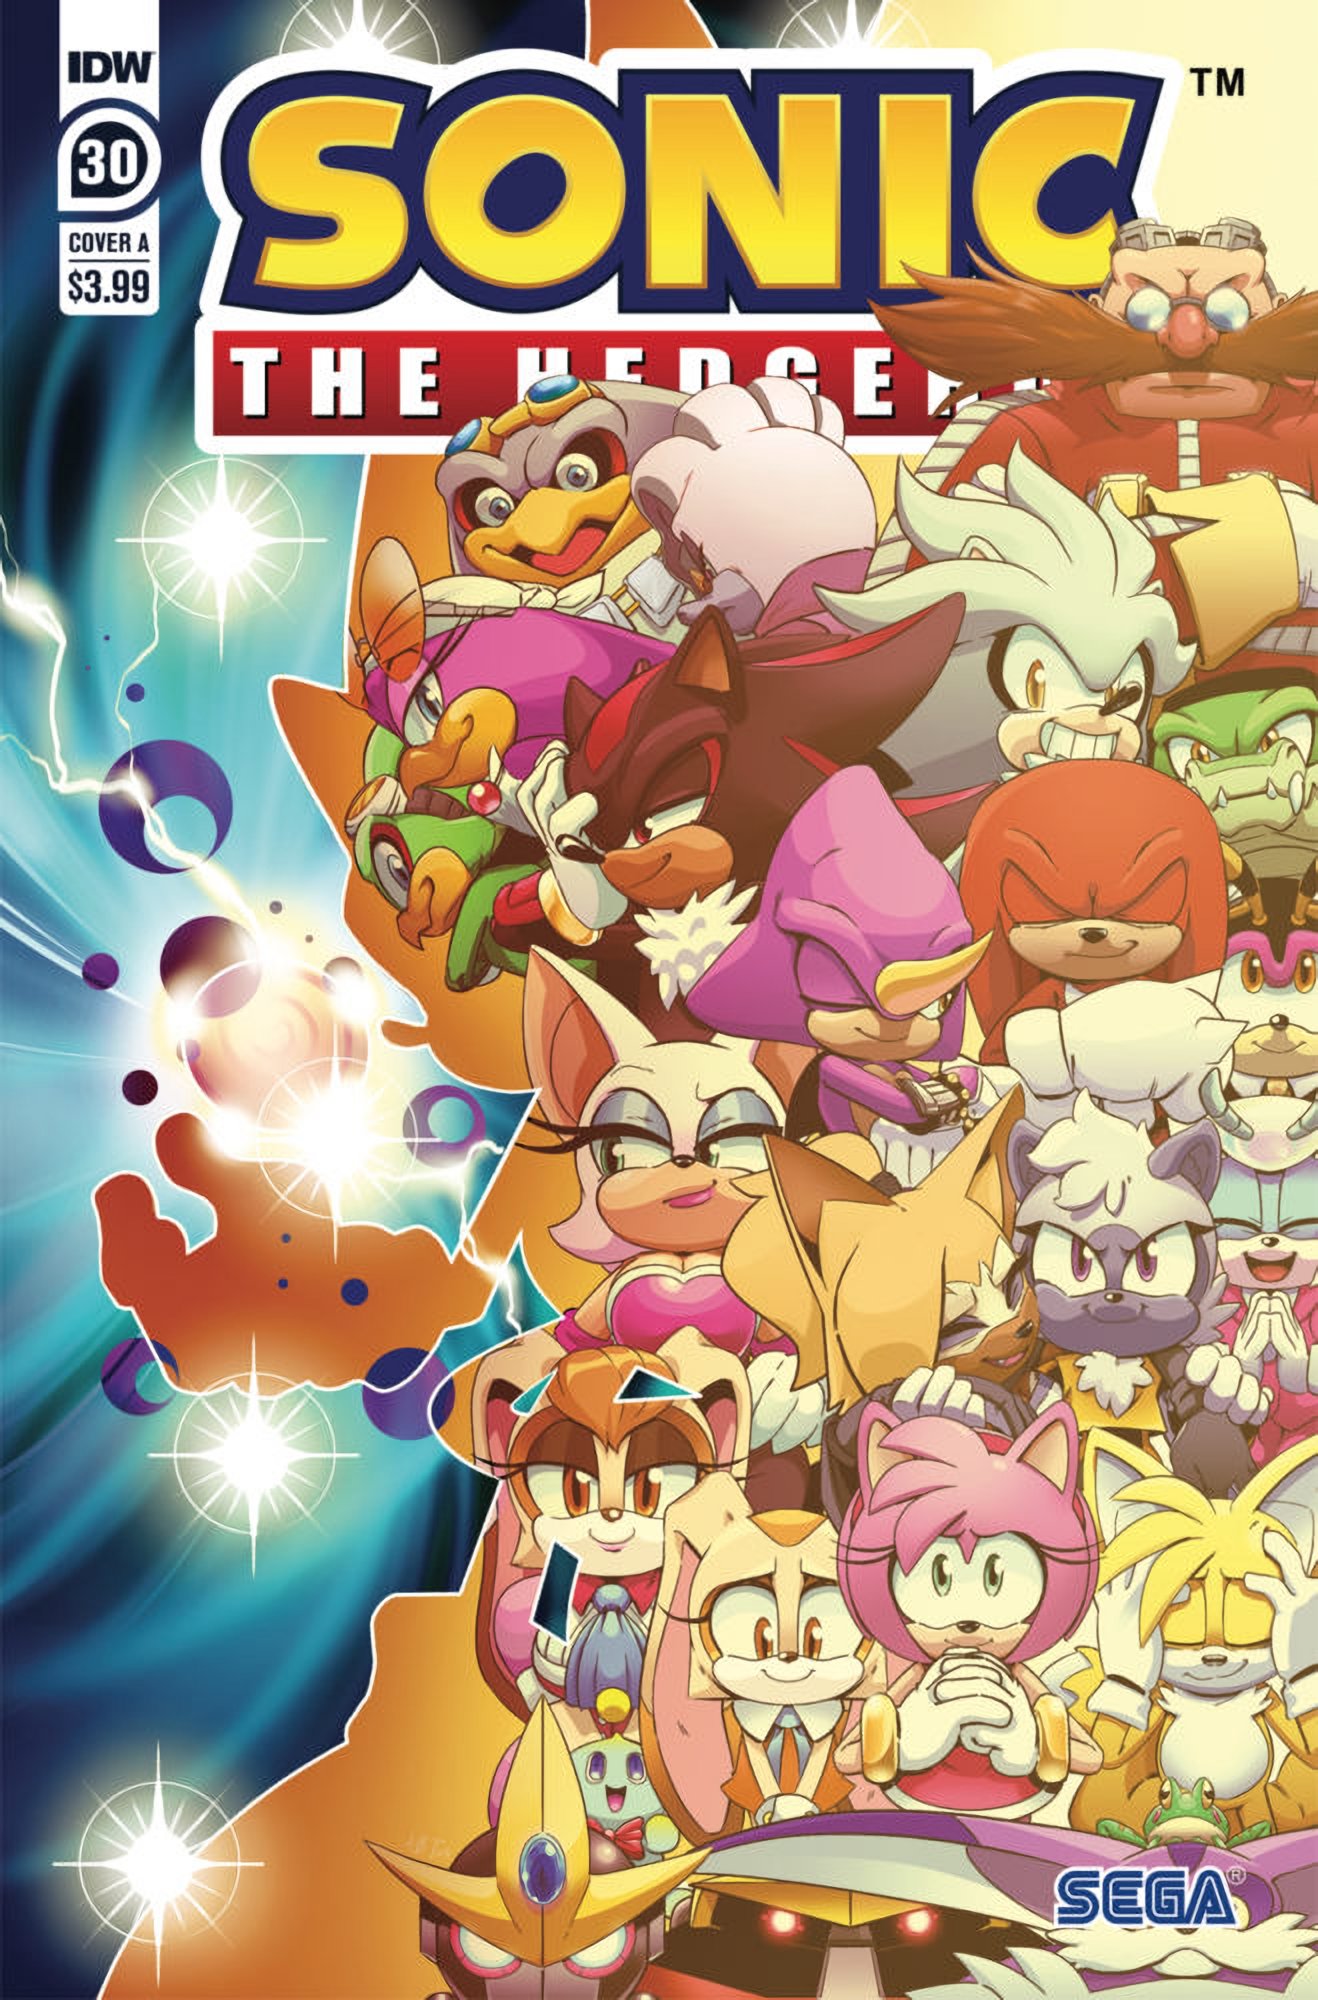 IDW Sonic Issue 30 covers Tails' Channel